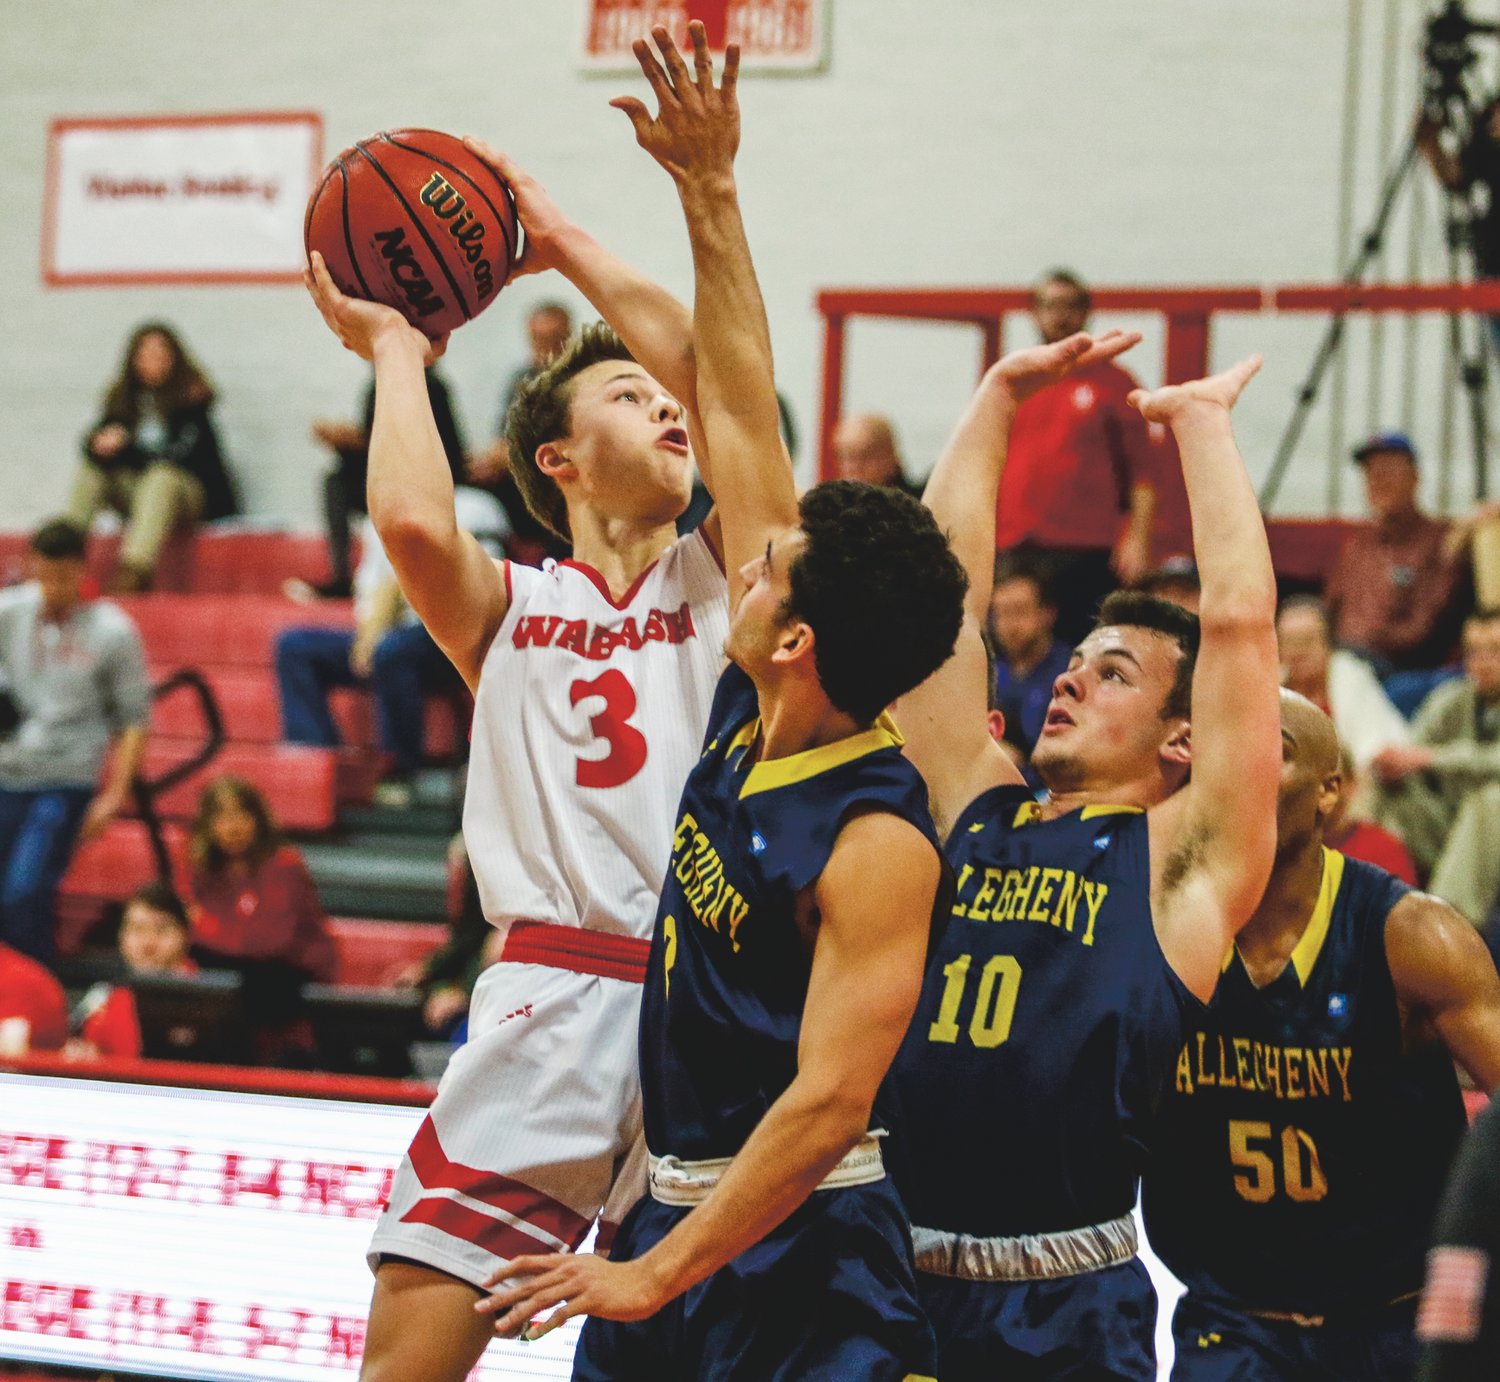 Wabash guard Jack Davidson led the Little Giants to a win over Allegheny with a game-high 30 points. The junior also moved past the 1500-point barrier in the win.